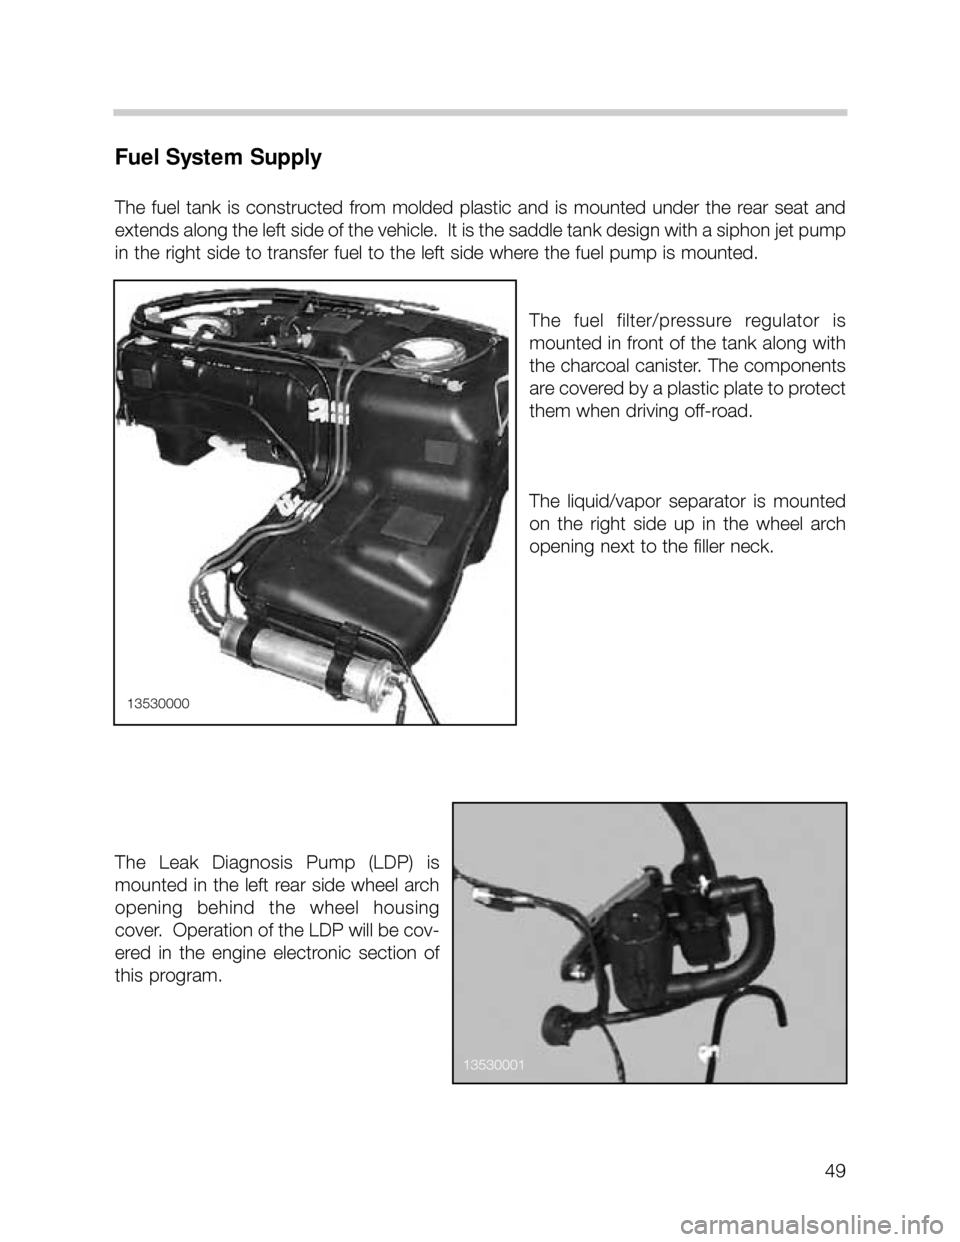 BMW X5 2002 E53 Workshop Manual 49
Fuel System Supply
The  fuel  tank  is  constructed  from  molded  plastic  and  is  mounted  under  the  rear  seat  and
extends along the left side of the vehicle.  It is the saddle tank design w